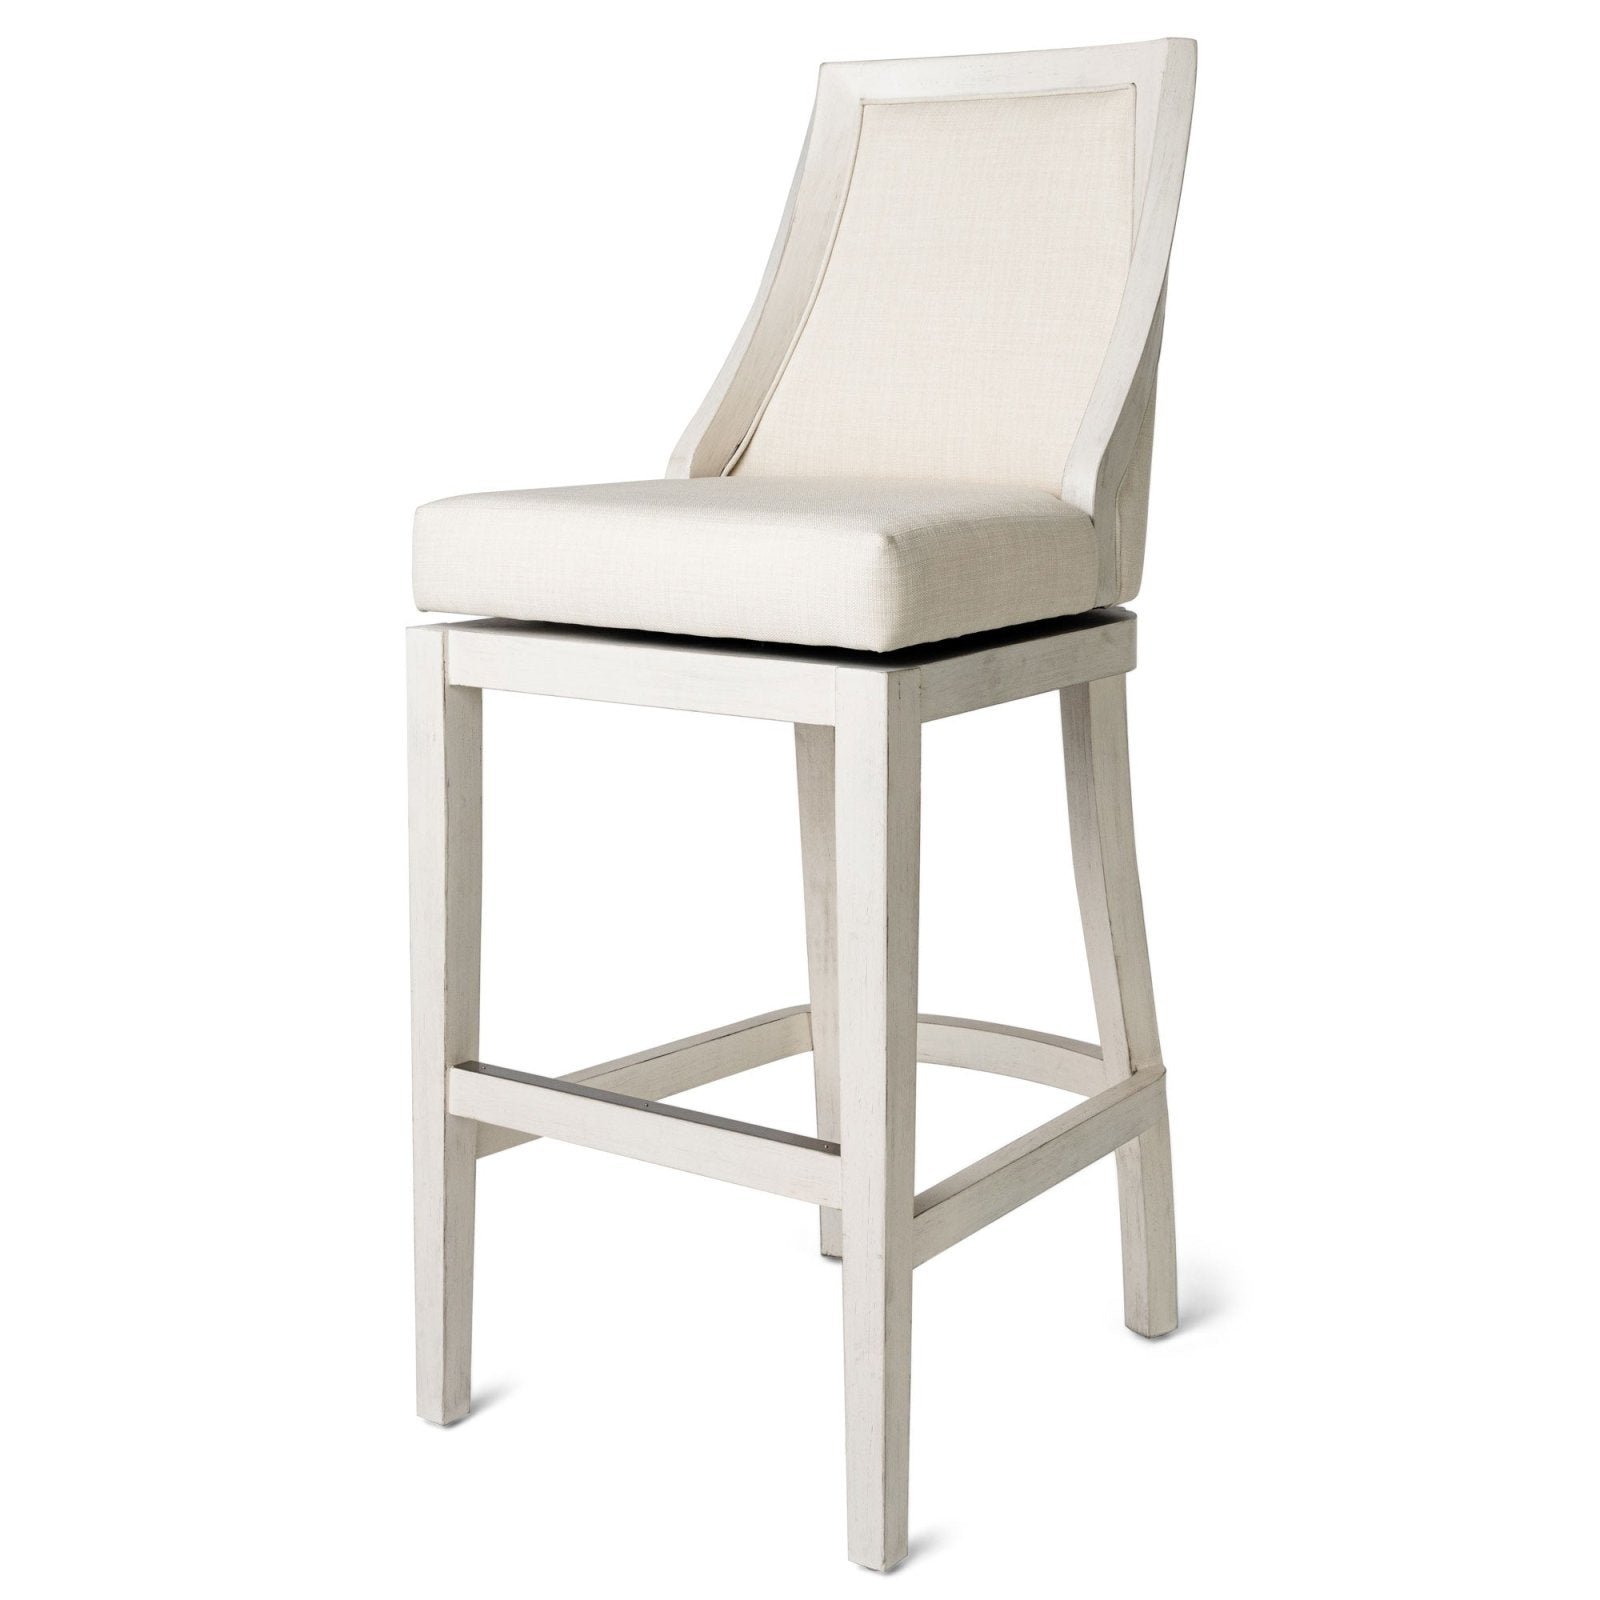 Vienna Bar Stool in White Oak Finish with Natural Fabric Upholstery in Stools by Maven Lane